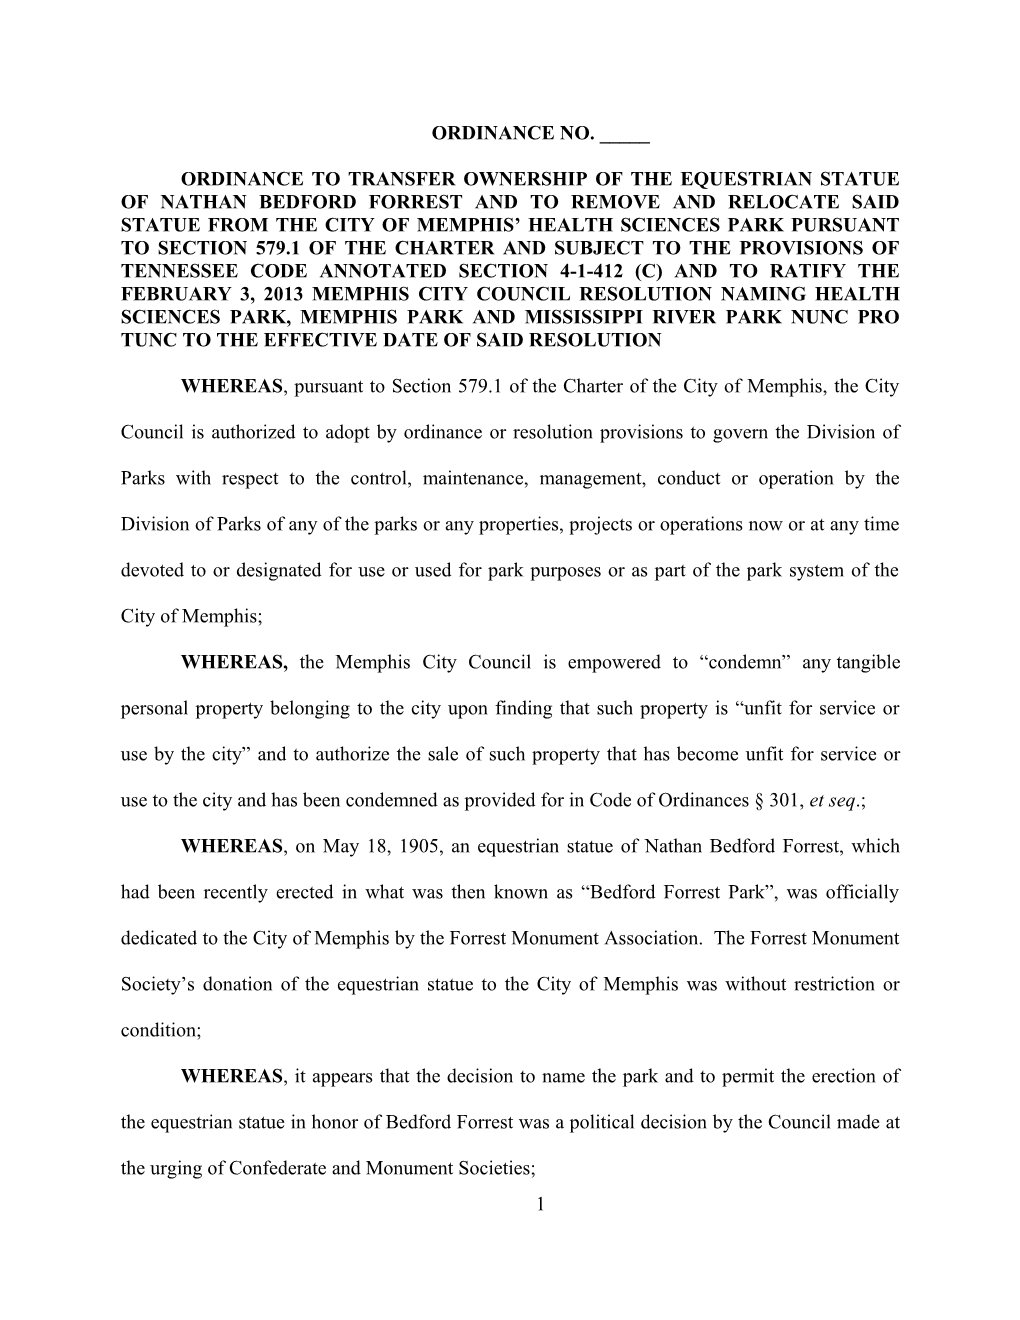 Ordinance to Transfer Ownership of the Equestrian Statue of Nathan Bedford Forrest And